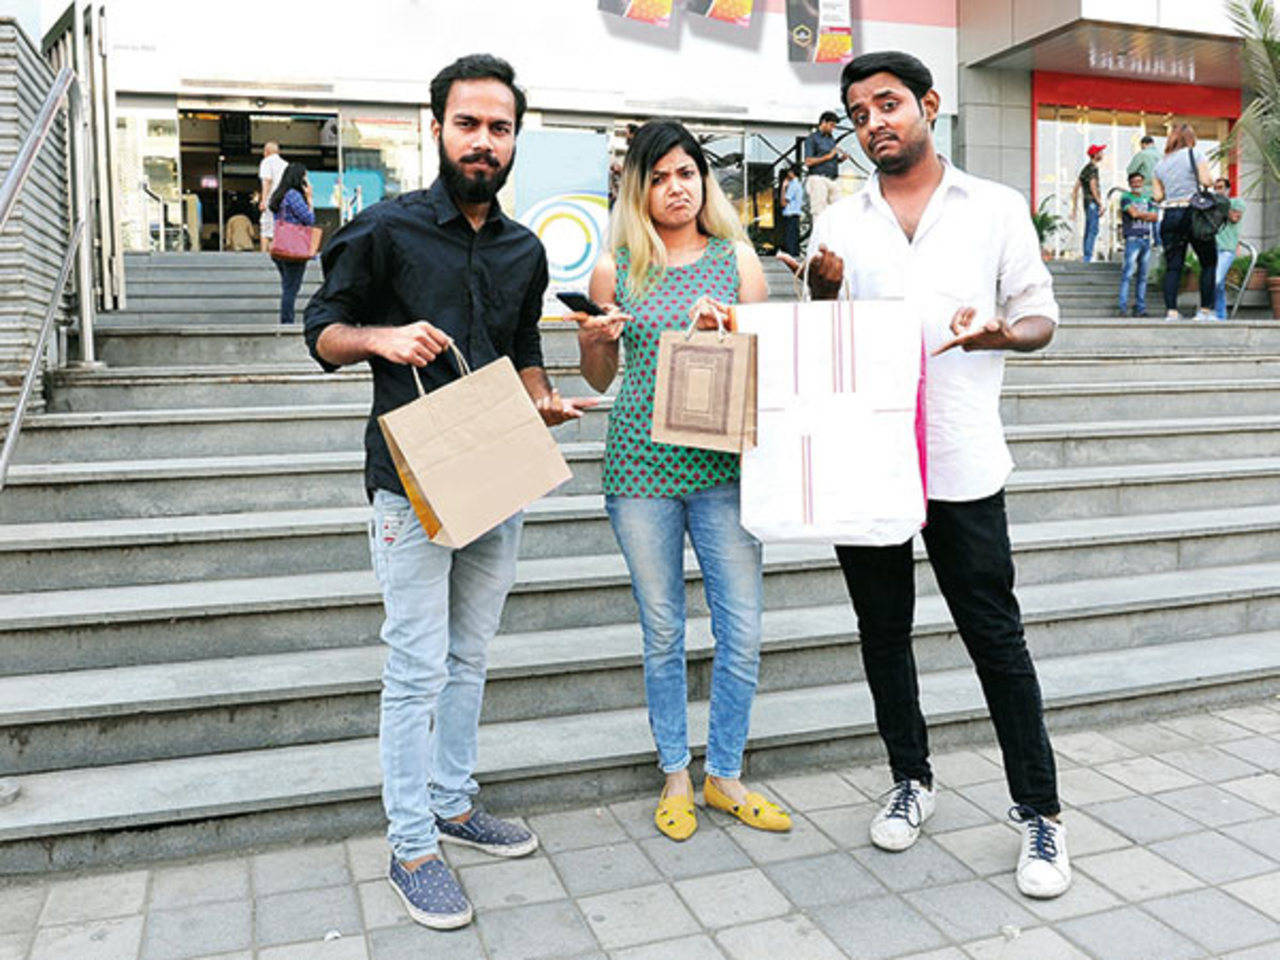 Bag Your Pardon Despite Fines Retailers Still Charge for Carry Bags